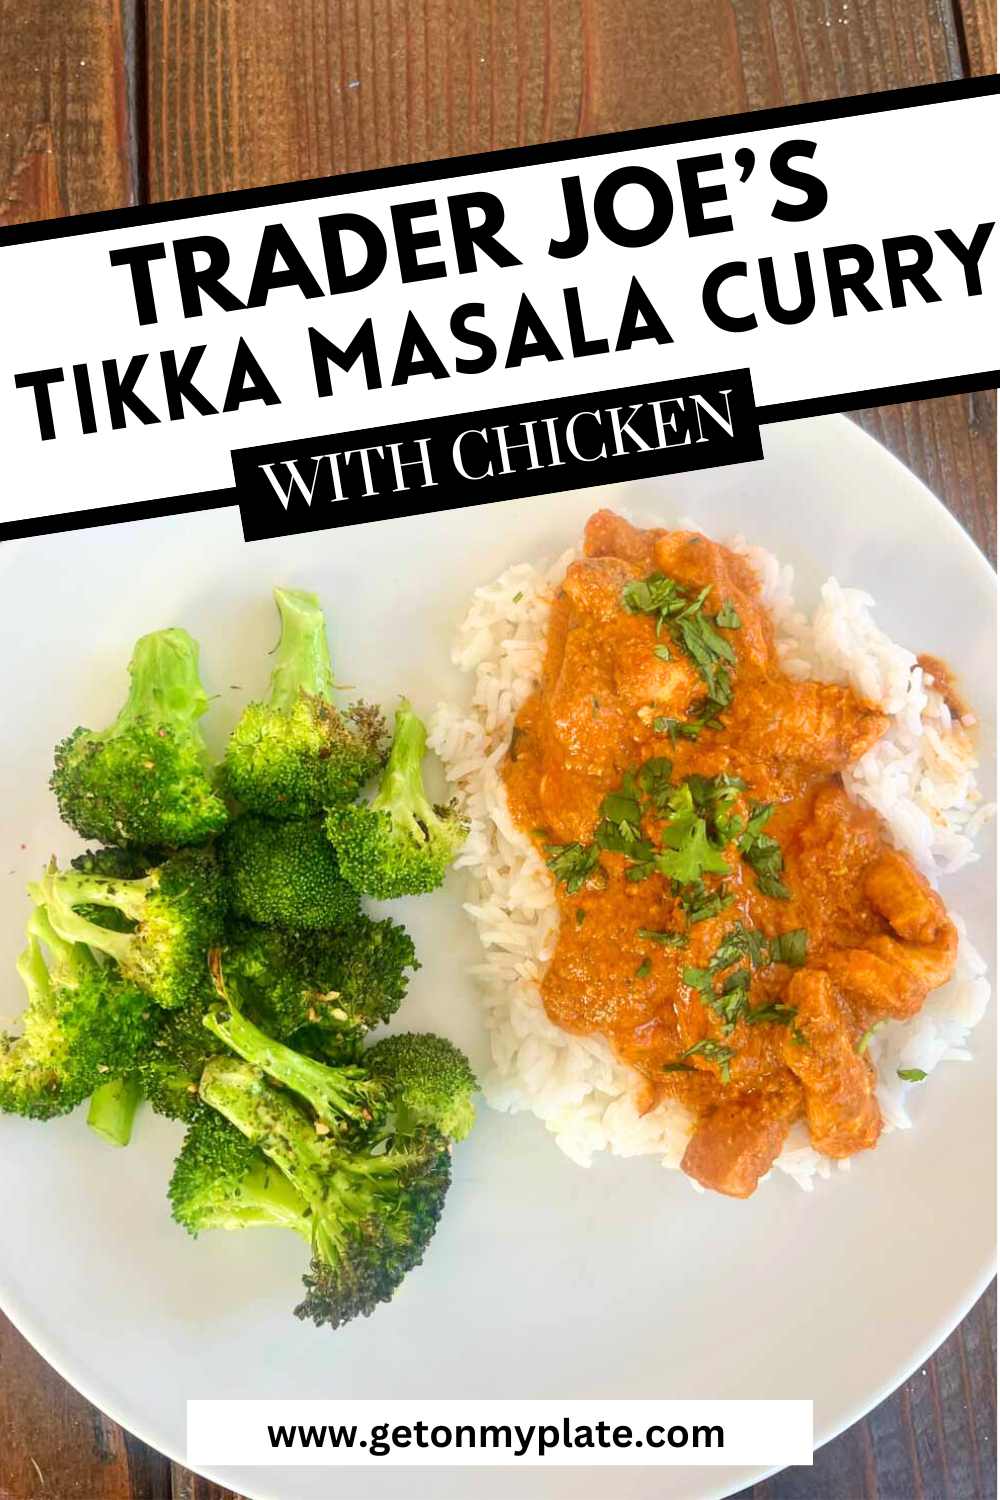 Pinterest Pin with Trader Joe's Tikka Masala Curry Sauce on top of rice with broccoli.